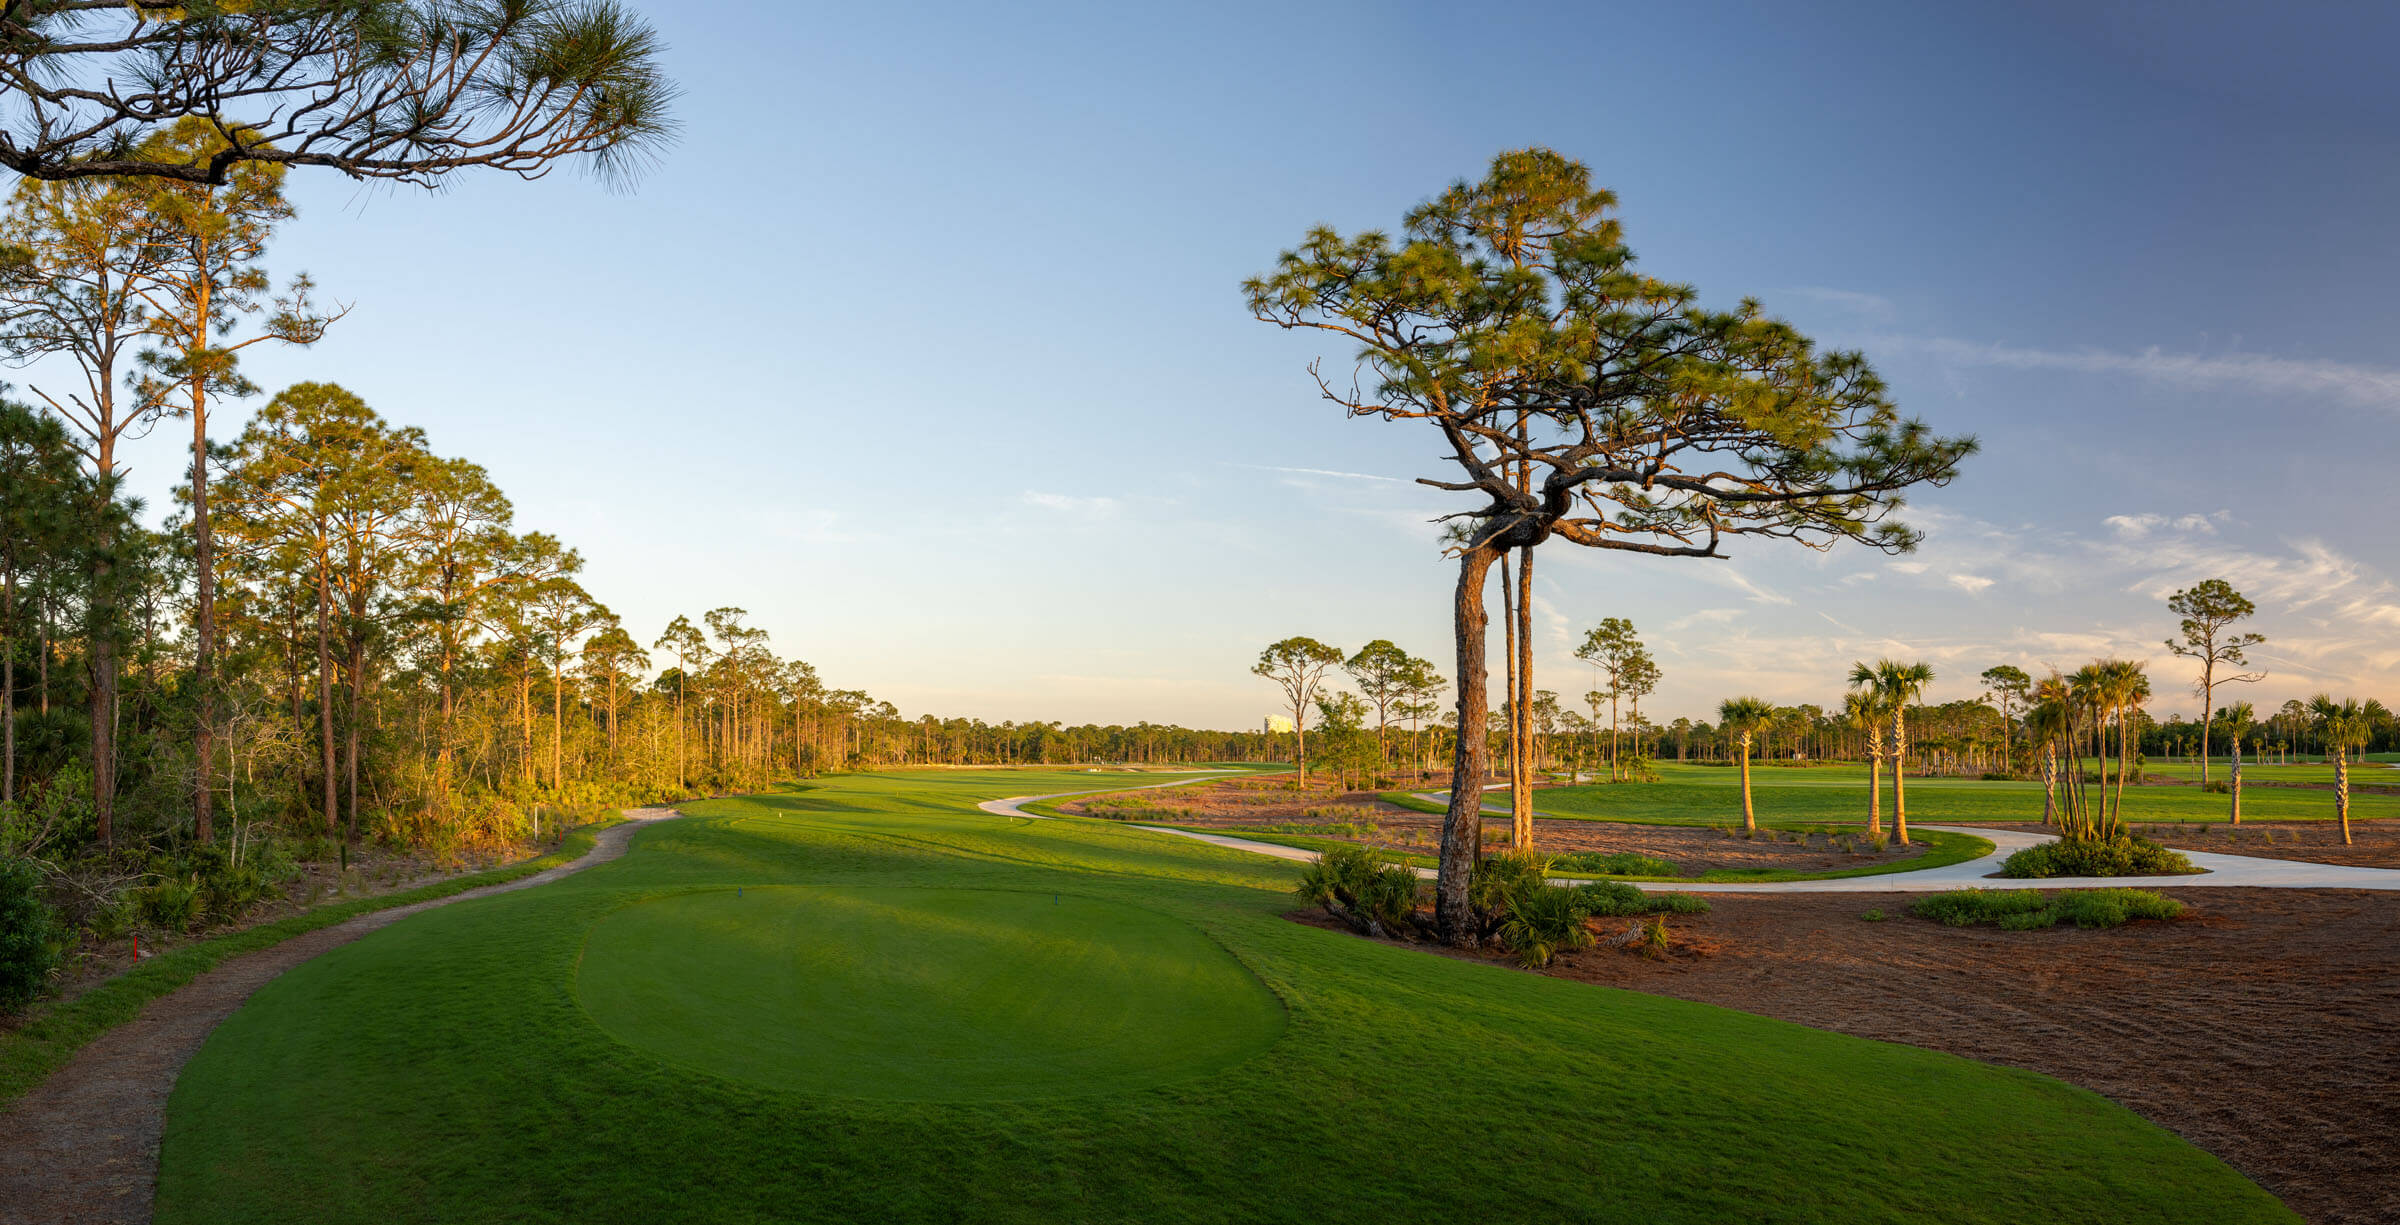 Scenic golf course with lush fairways, pine trees, and a winding path under a clear sky at sunset.